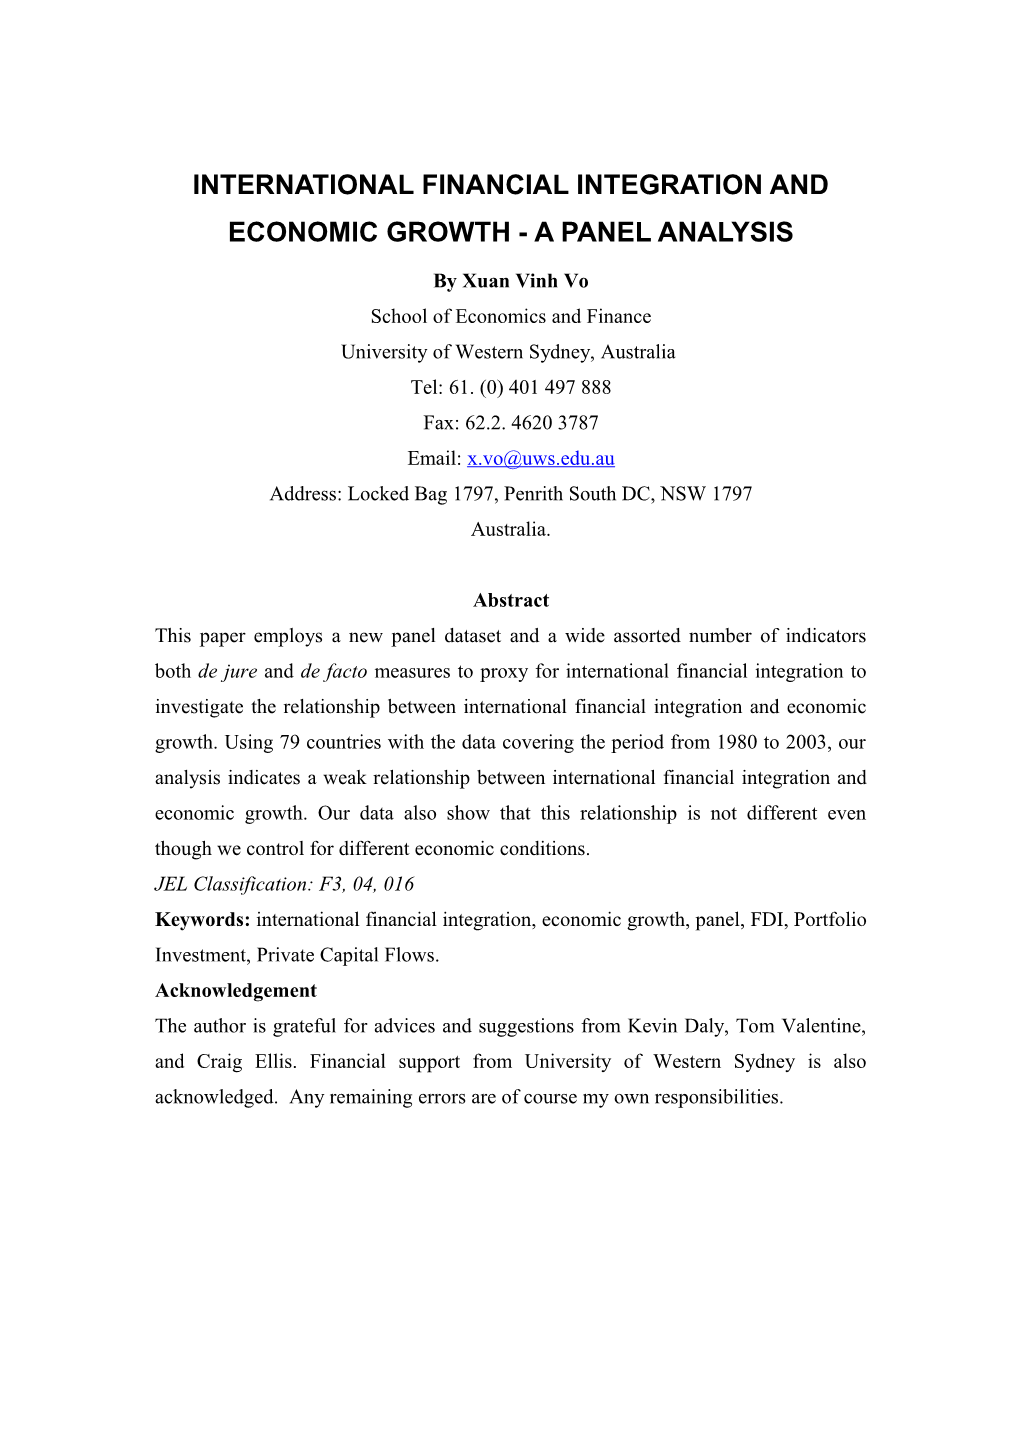 Chapter 4: International Financial Integration and Economic Growth